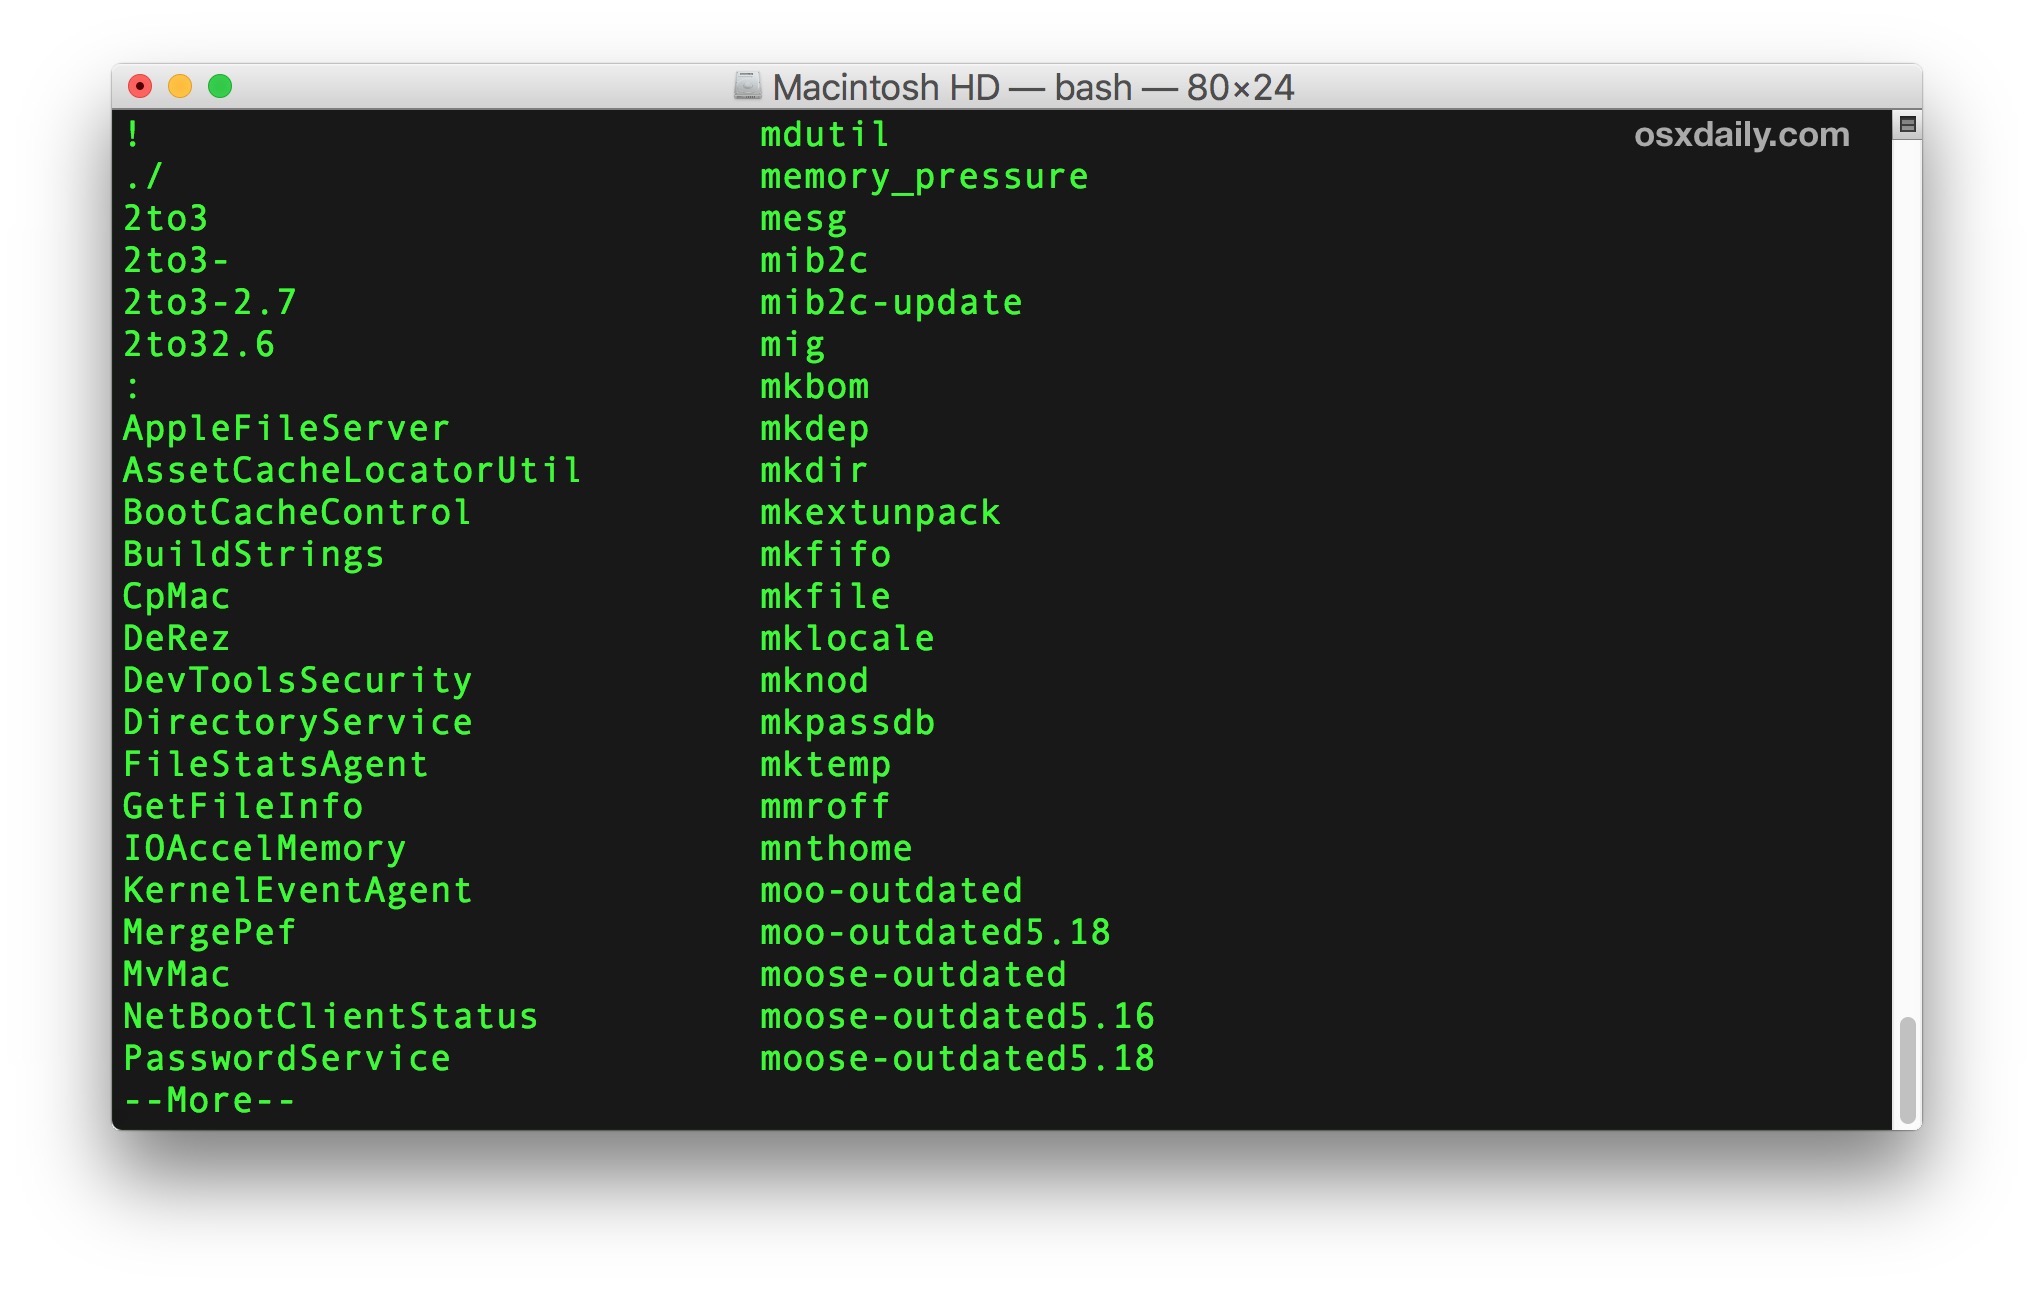 Showing all terminal commands on Mac